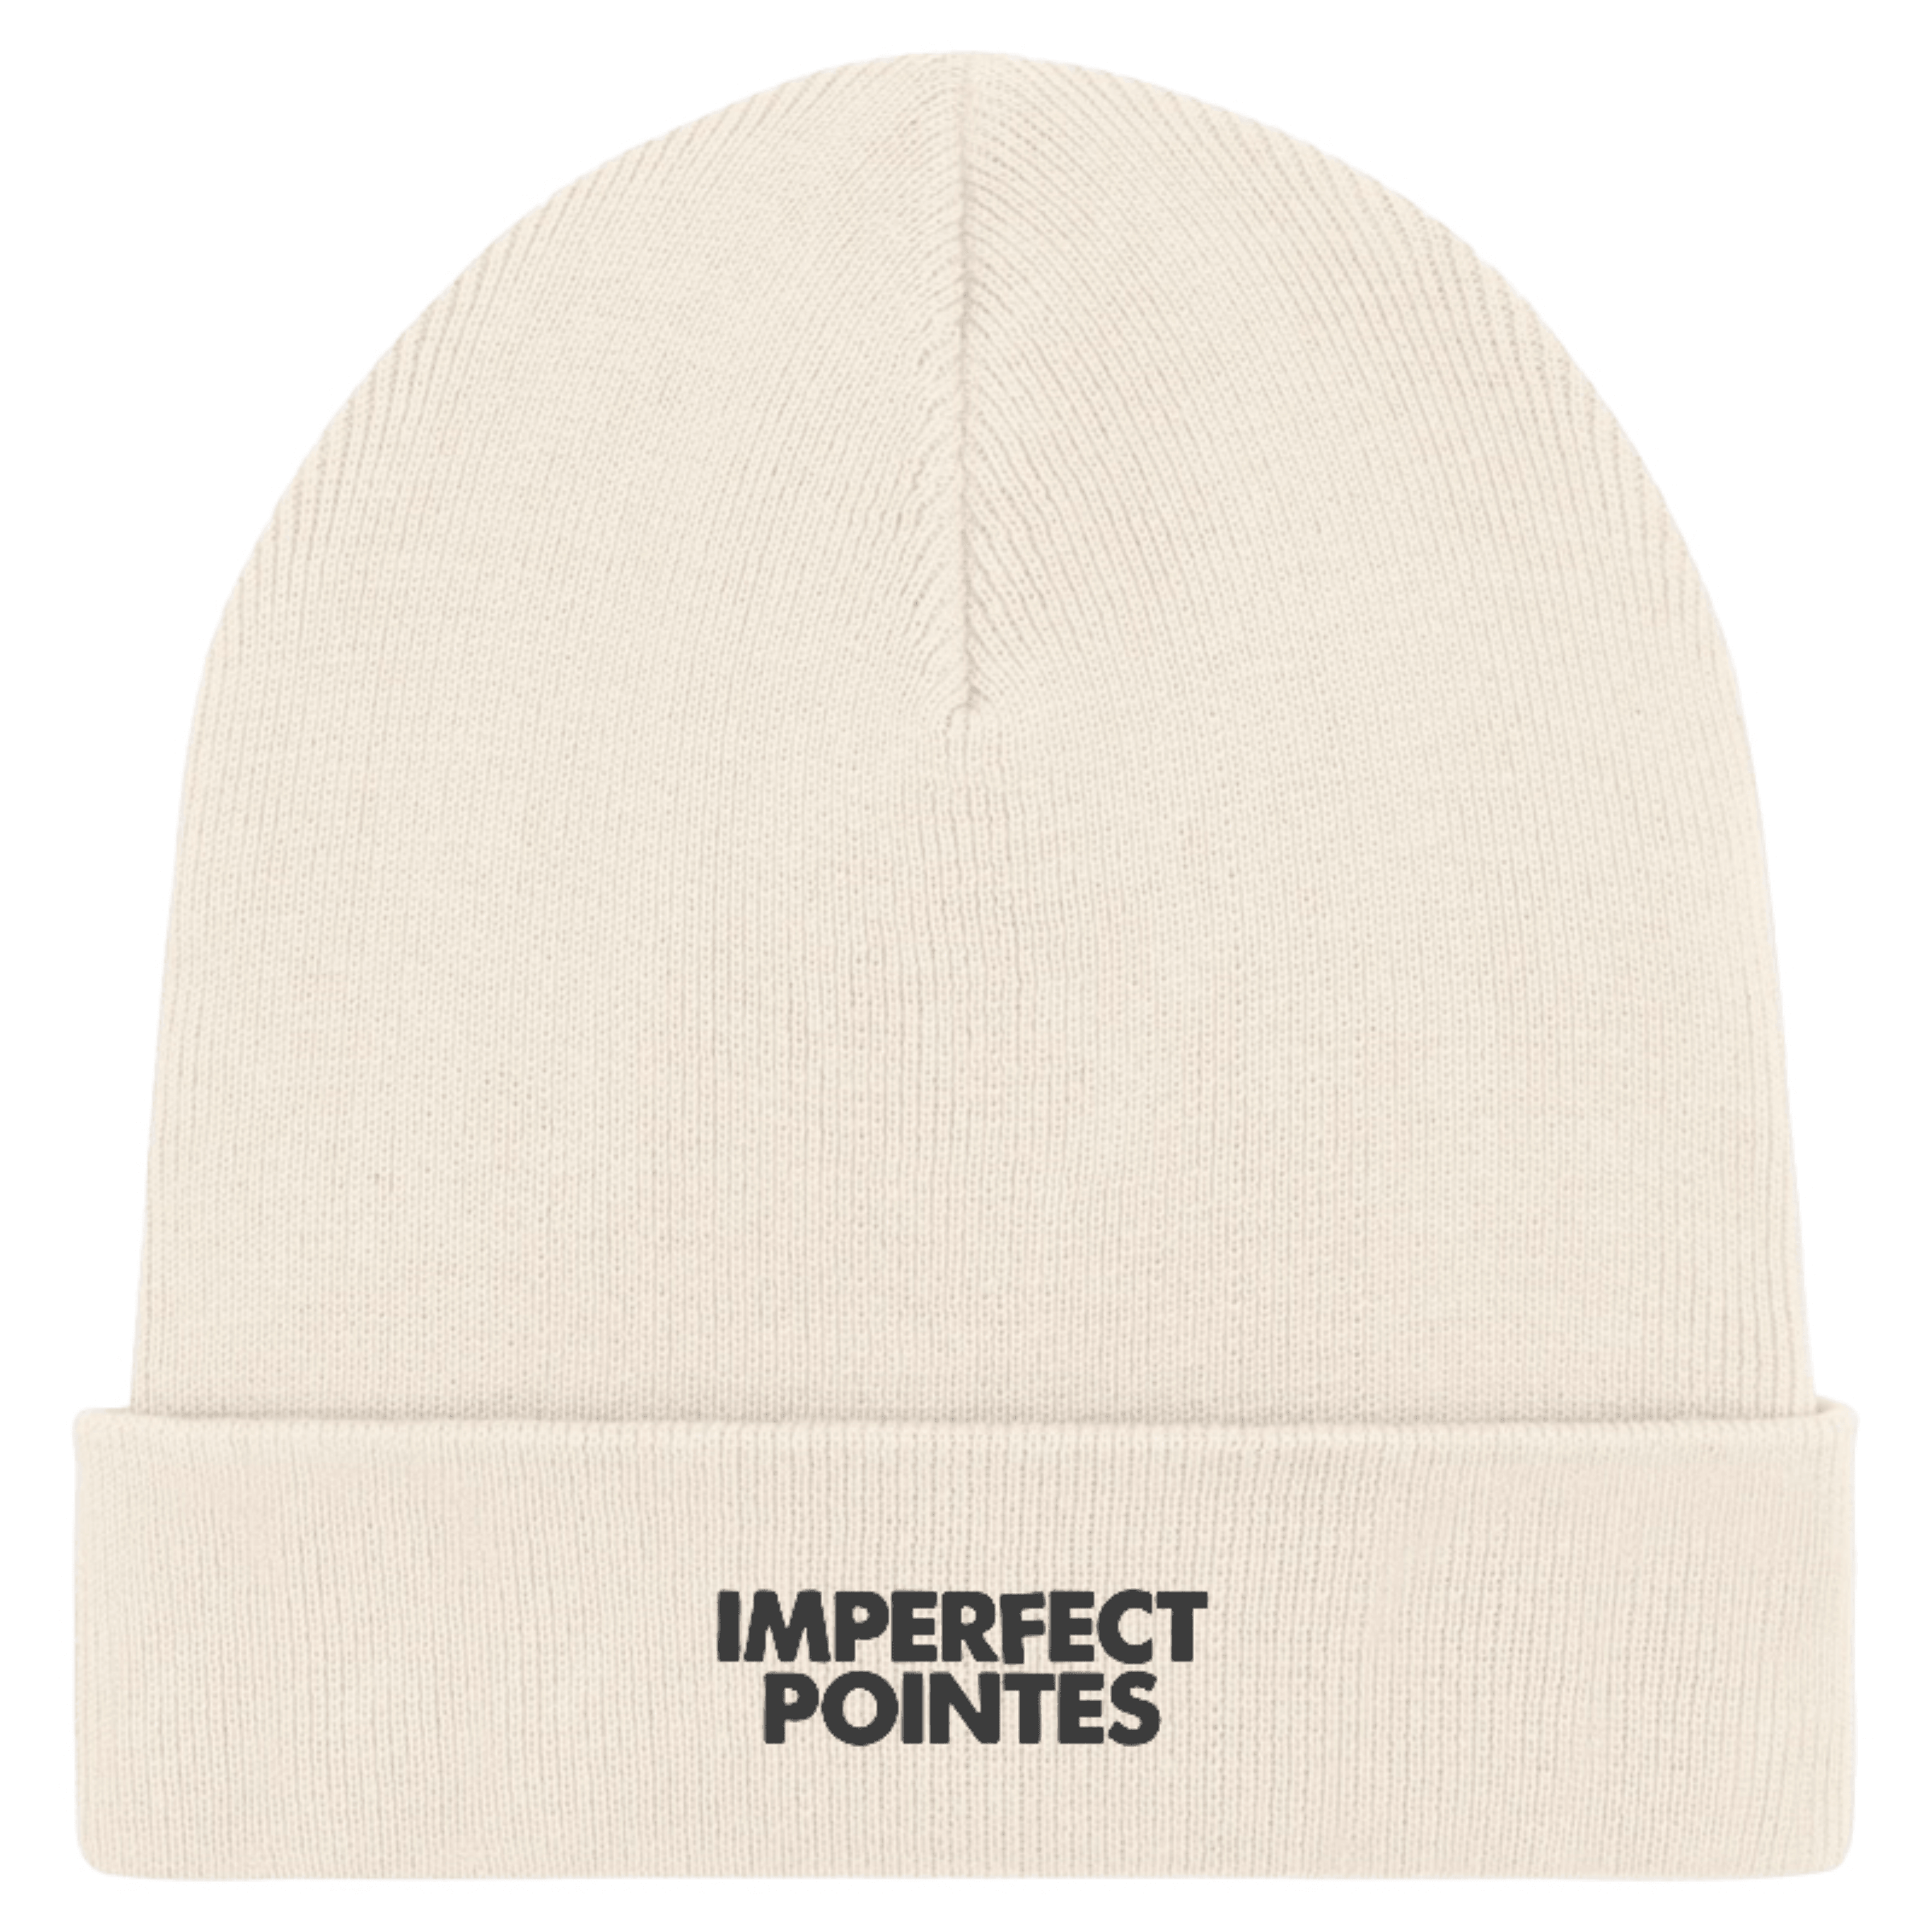 Imperfect Pointes Ribbed Beanie Embroidered - Accessories, Ready to Ship - Imperfect Pointes